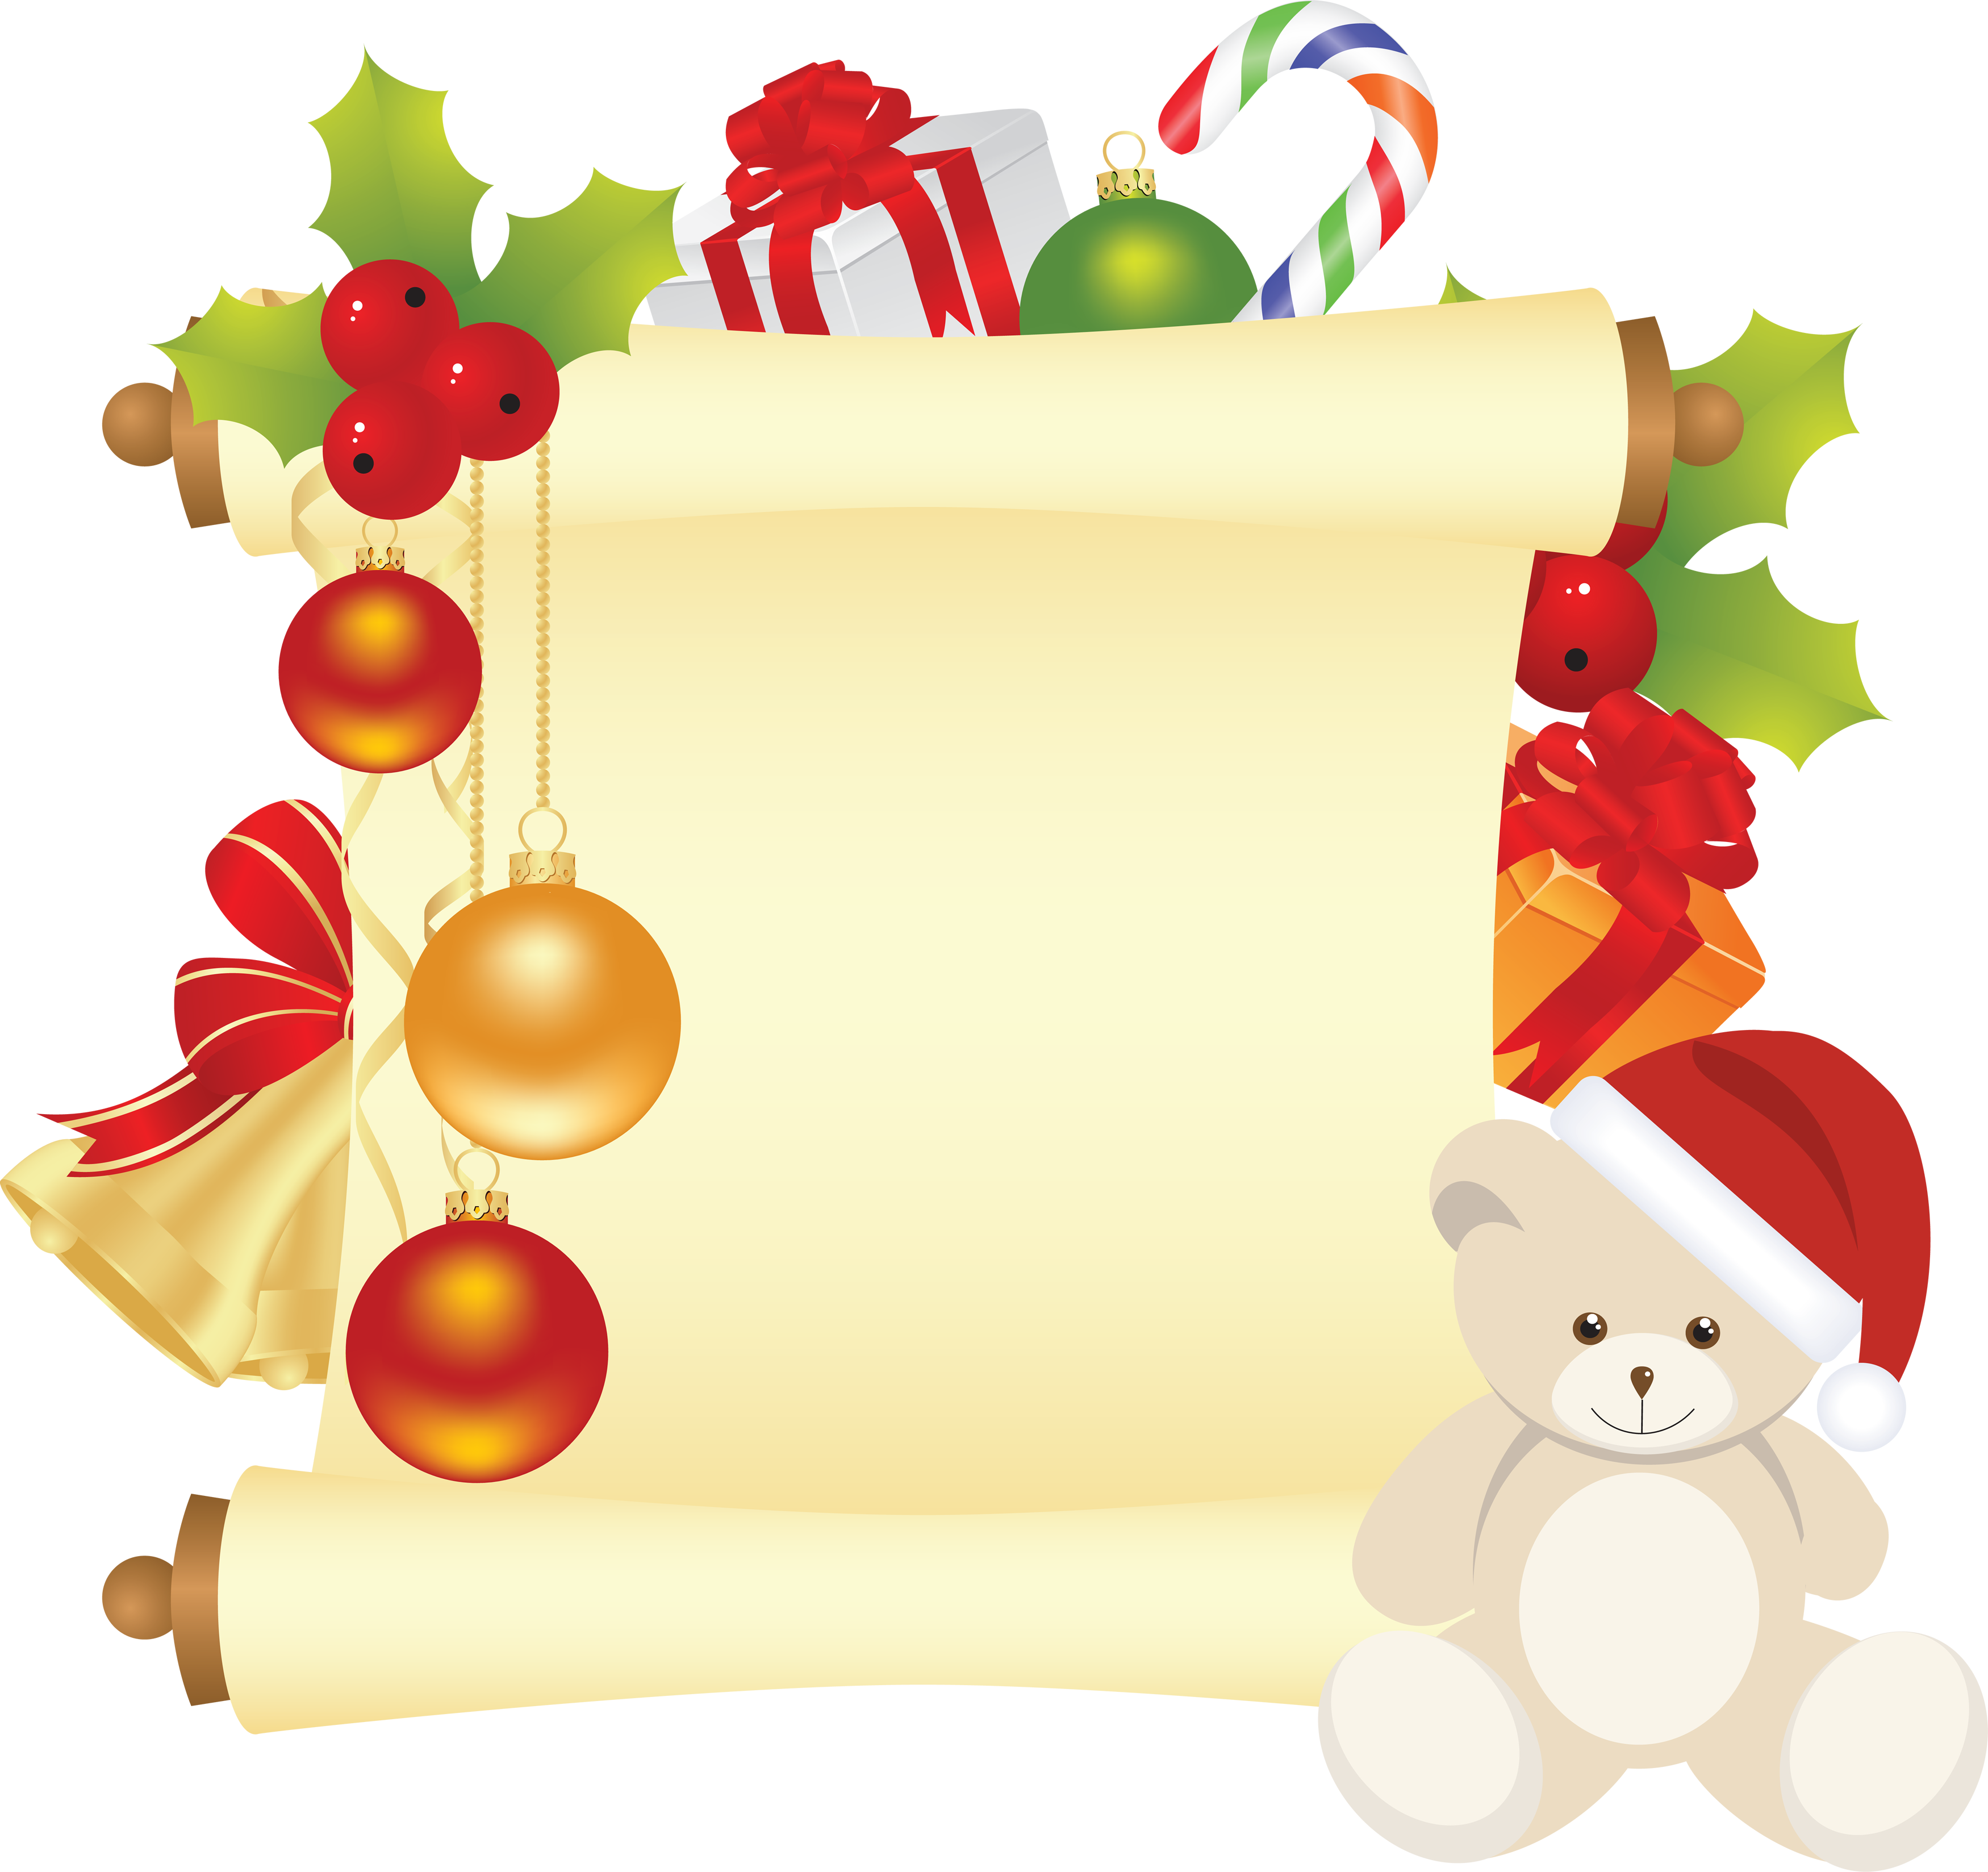 Free Christmas Scroll Cliparts, Download Free Clip Art, Free